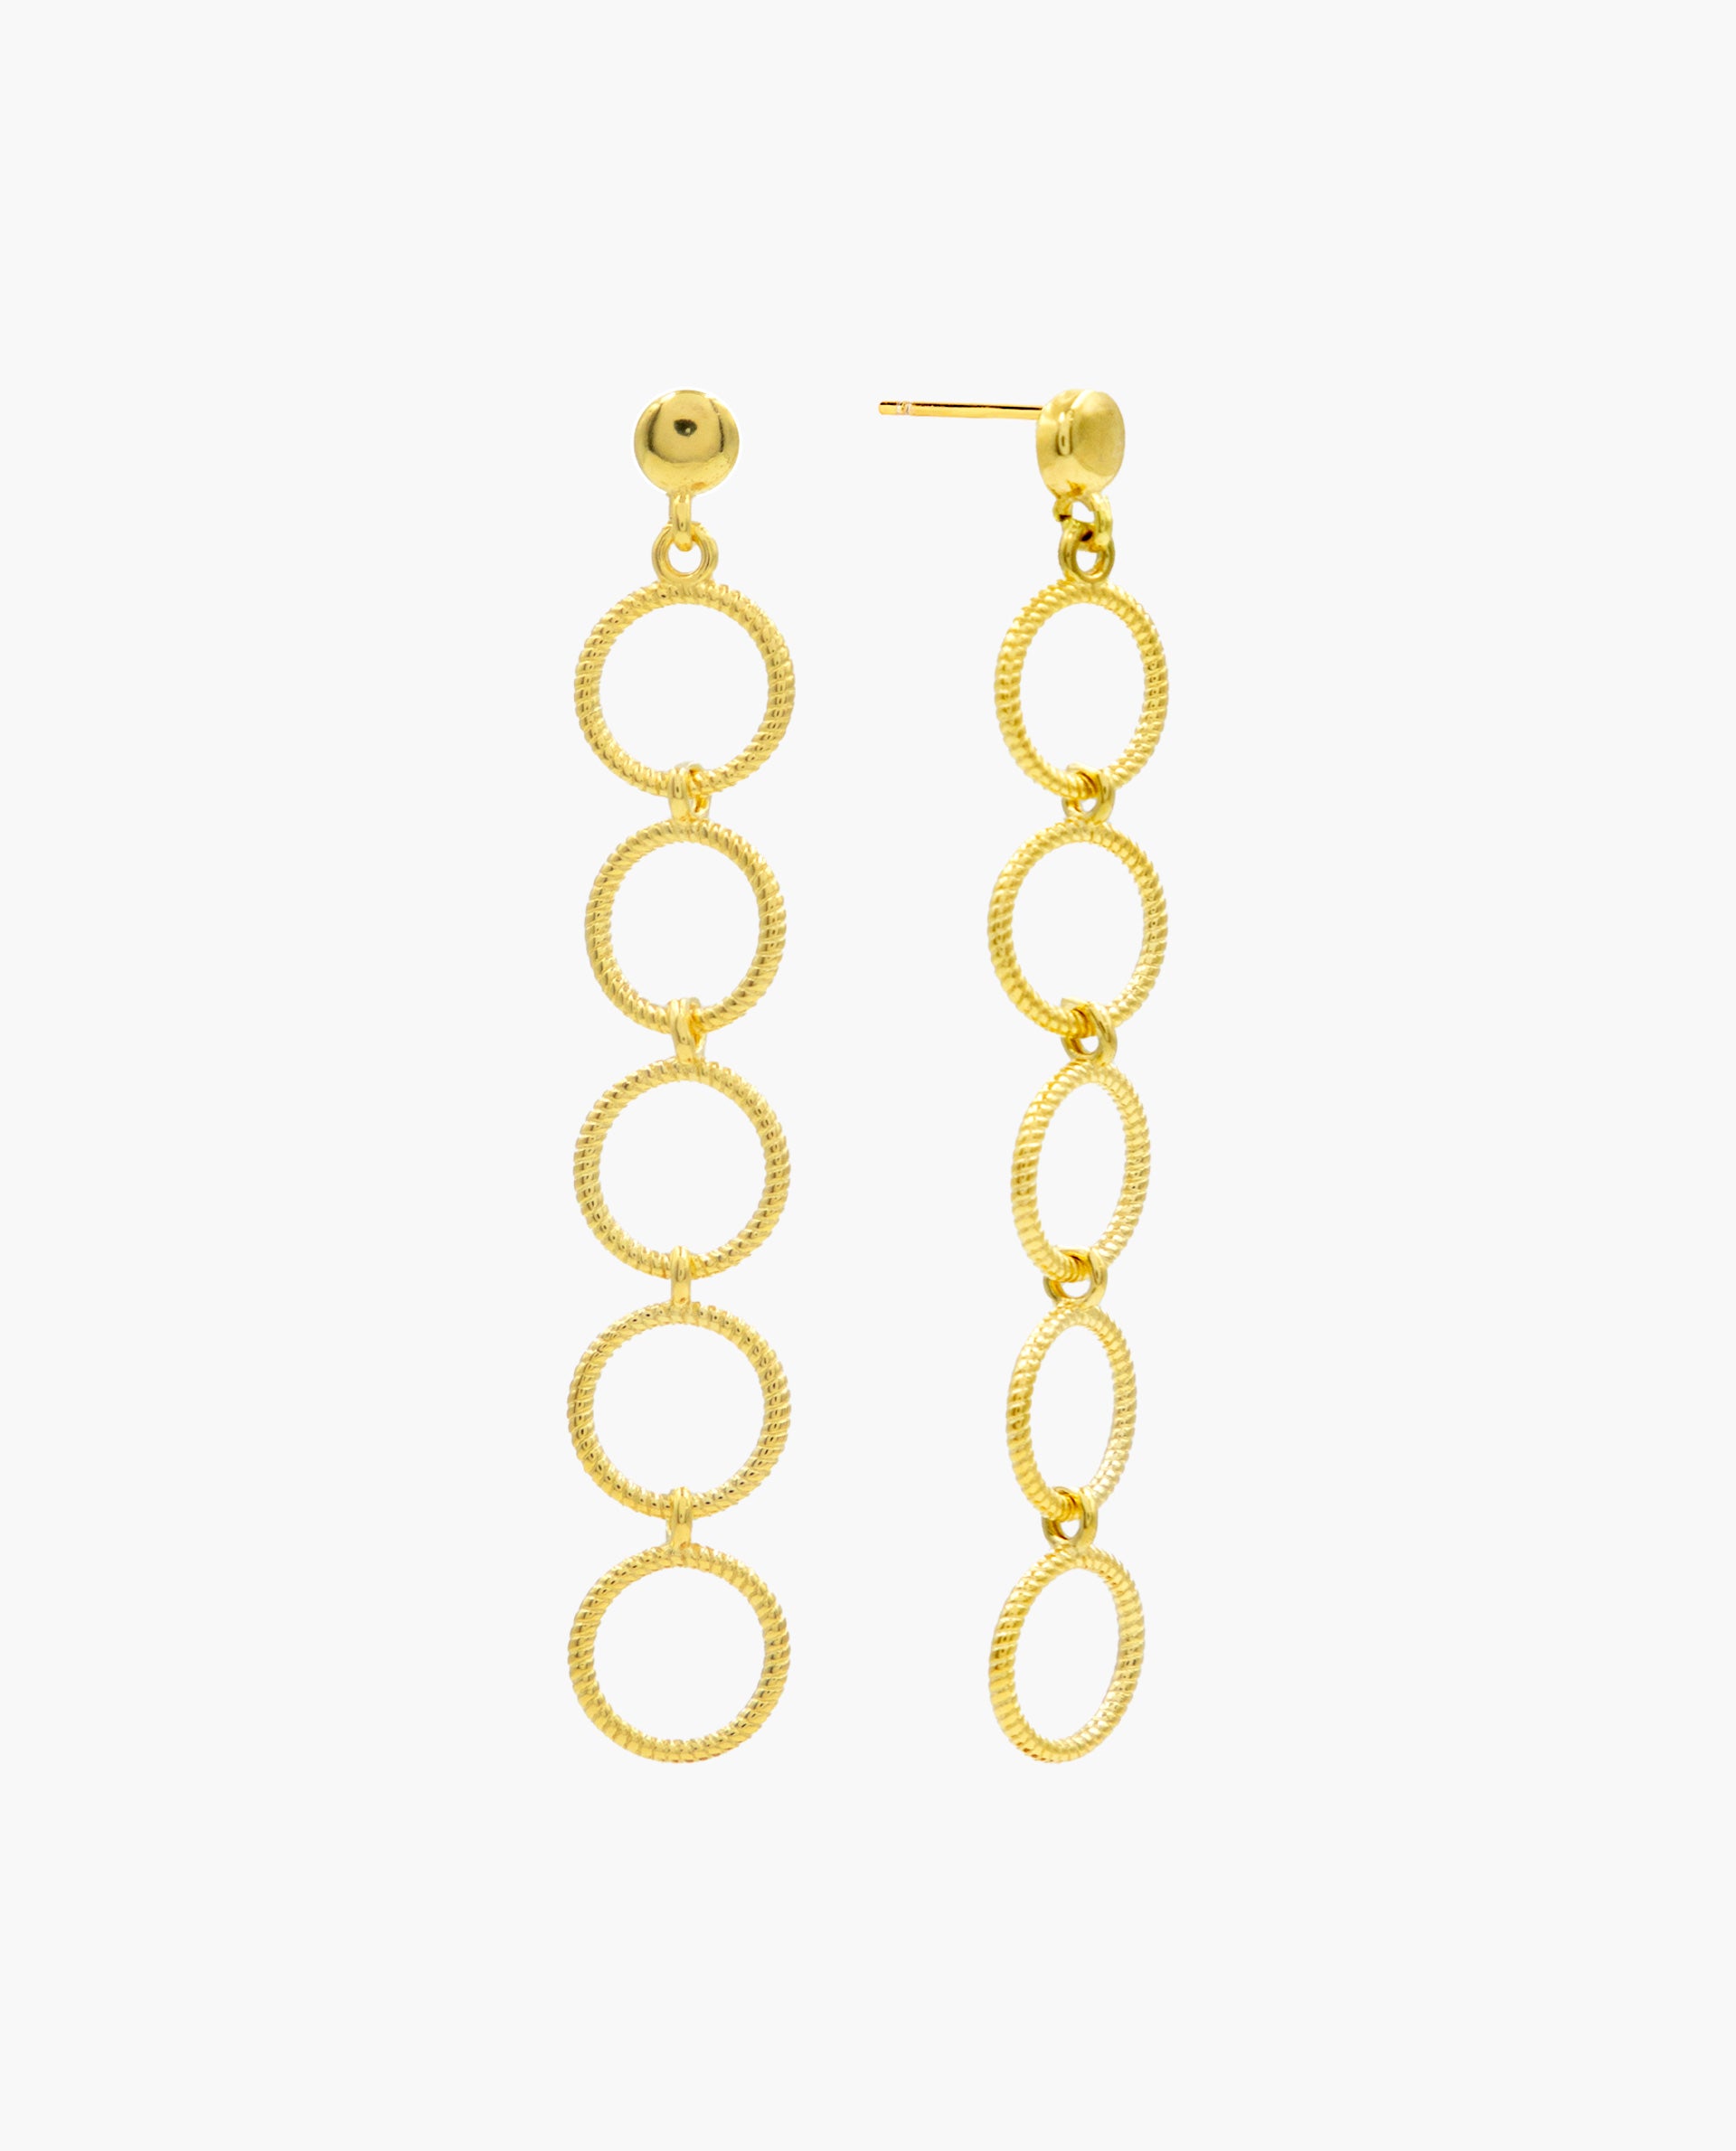 FRIENDSHIP EARRINGS - GOLD PLATED SILVER